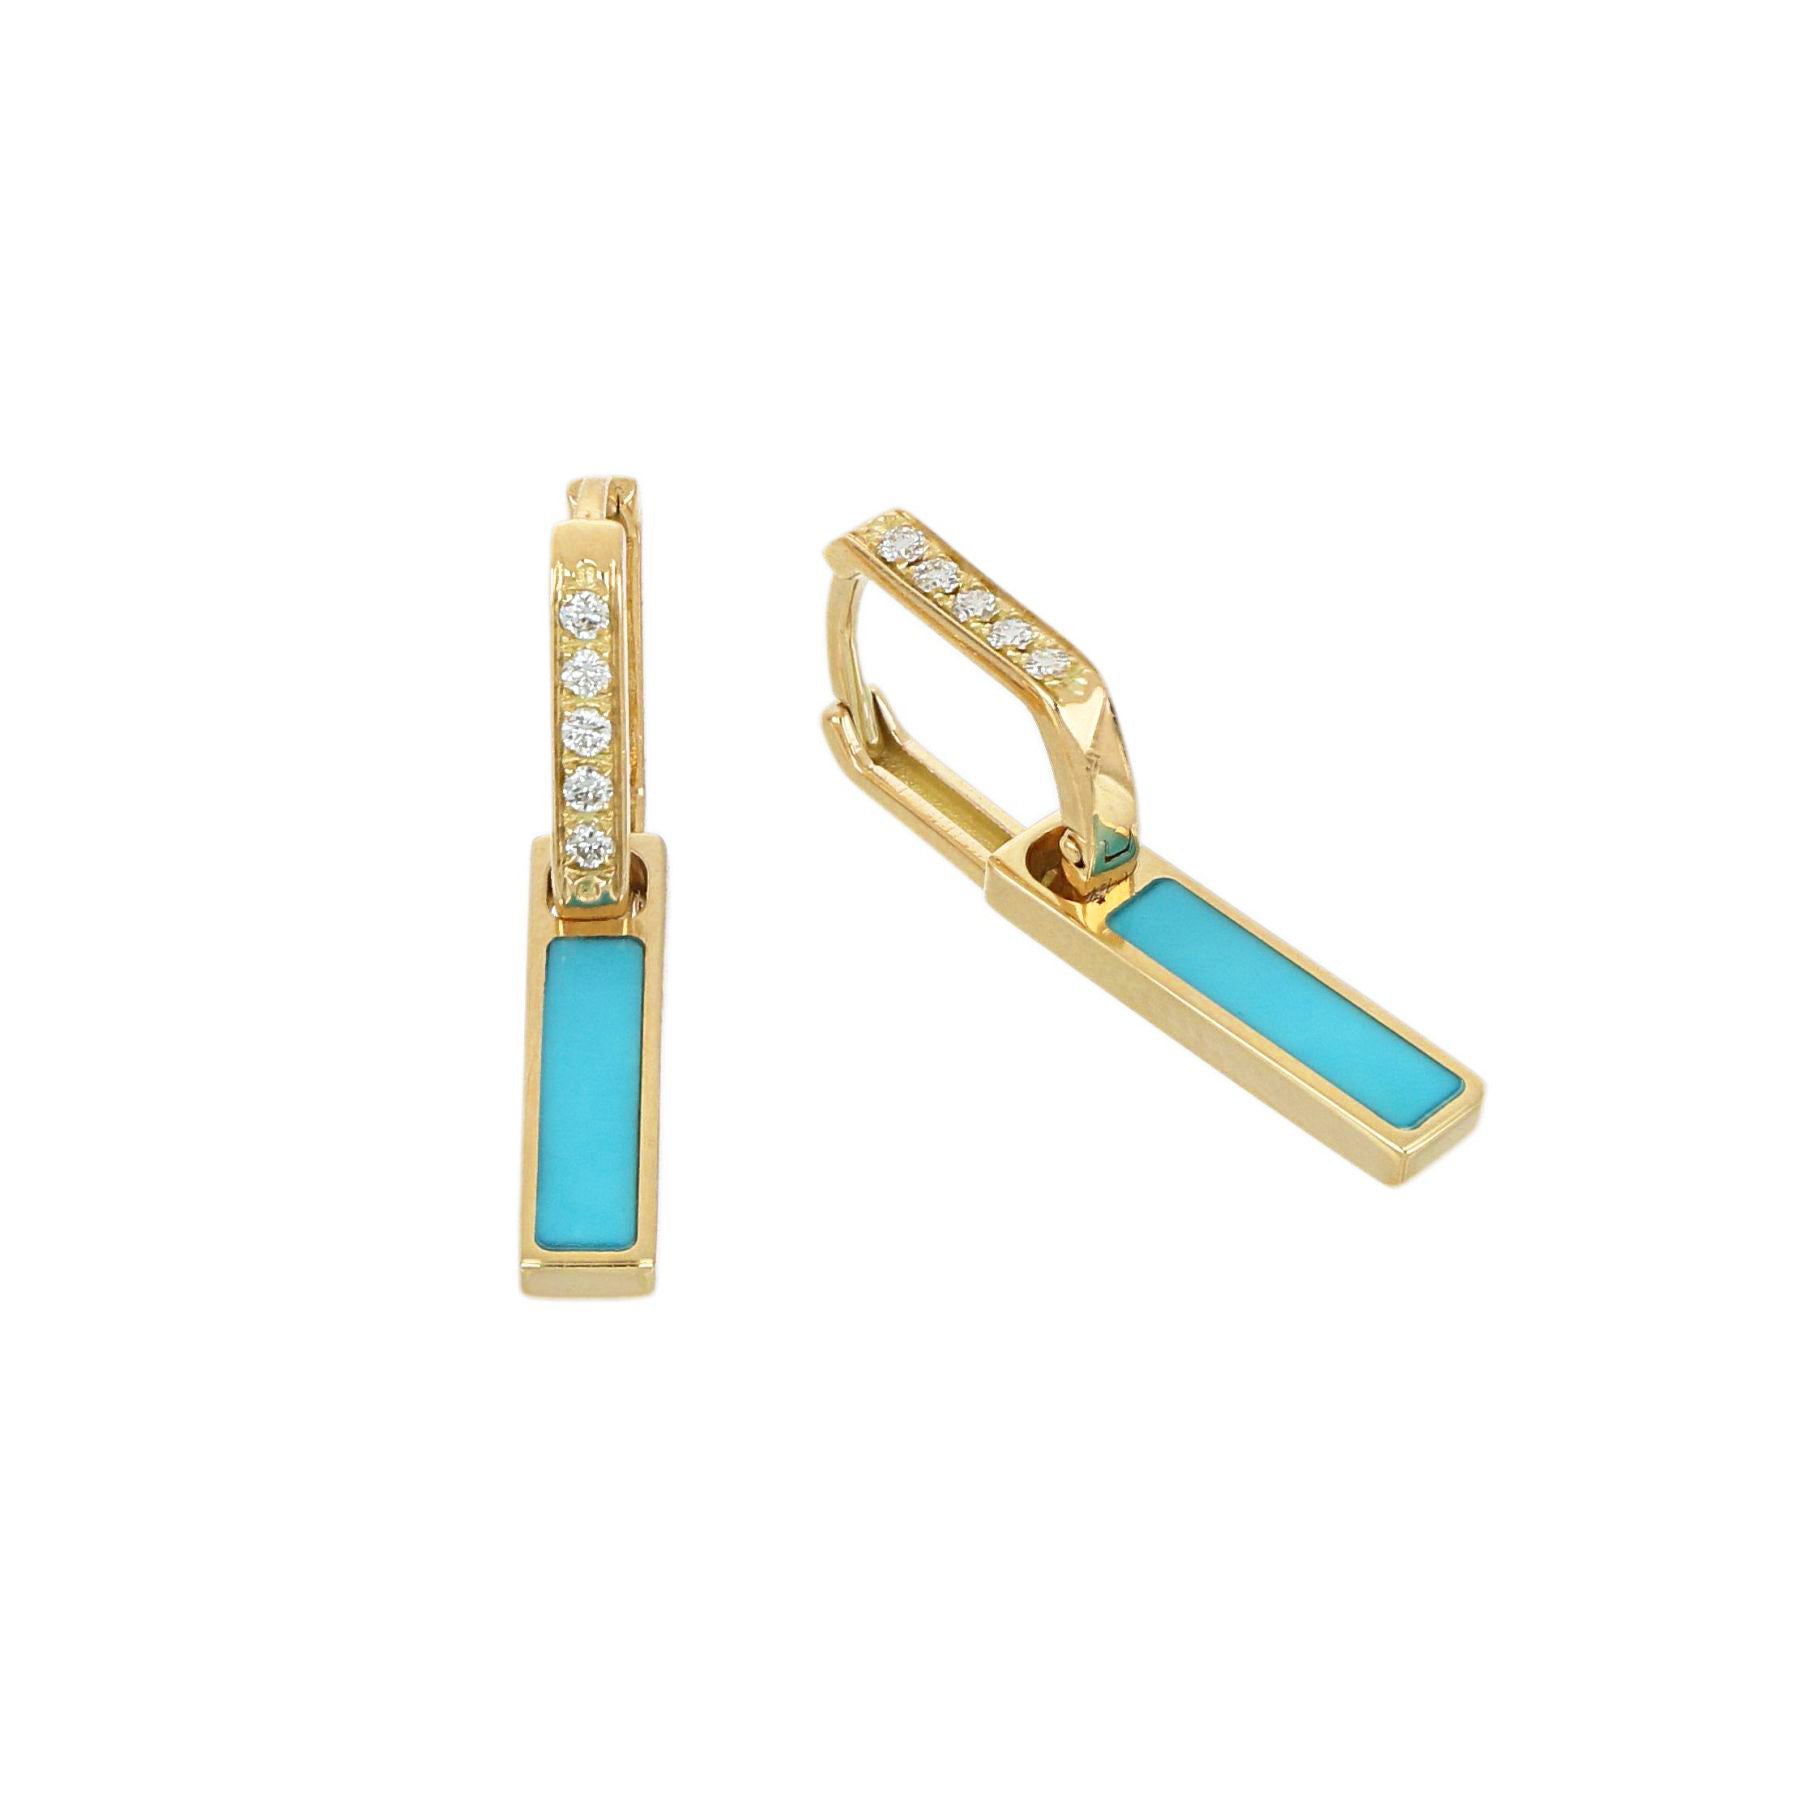 Video Unica Earrings Turquoise and Diamonds